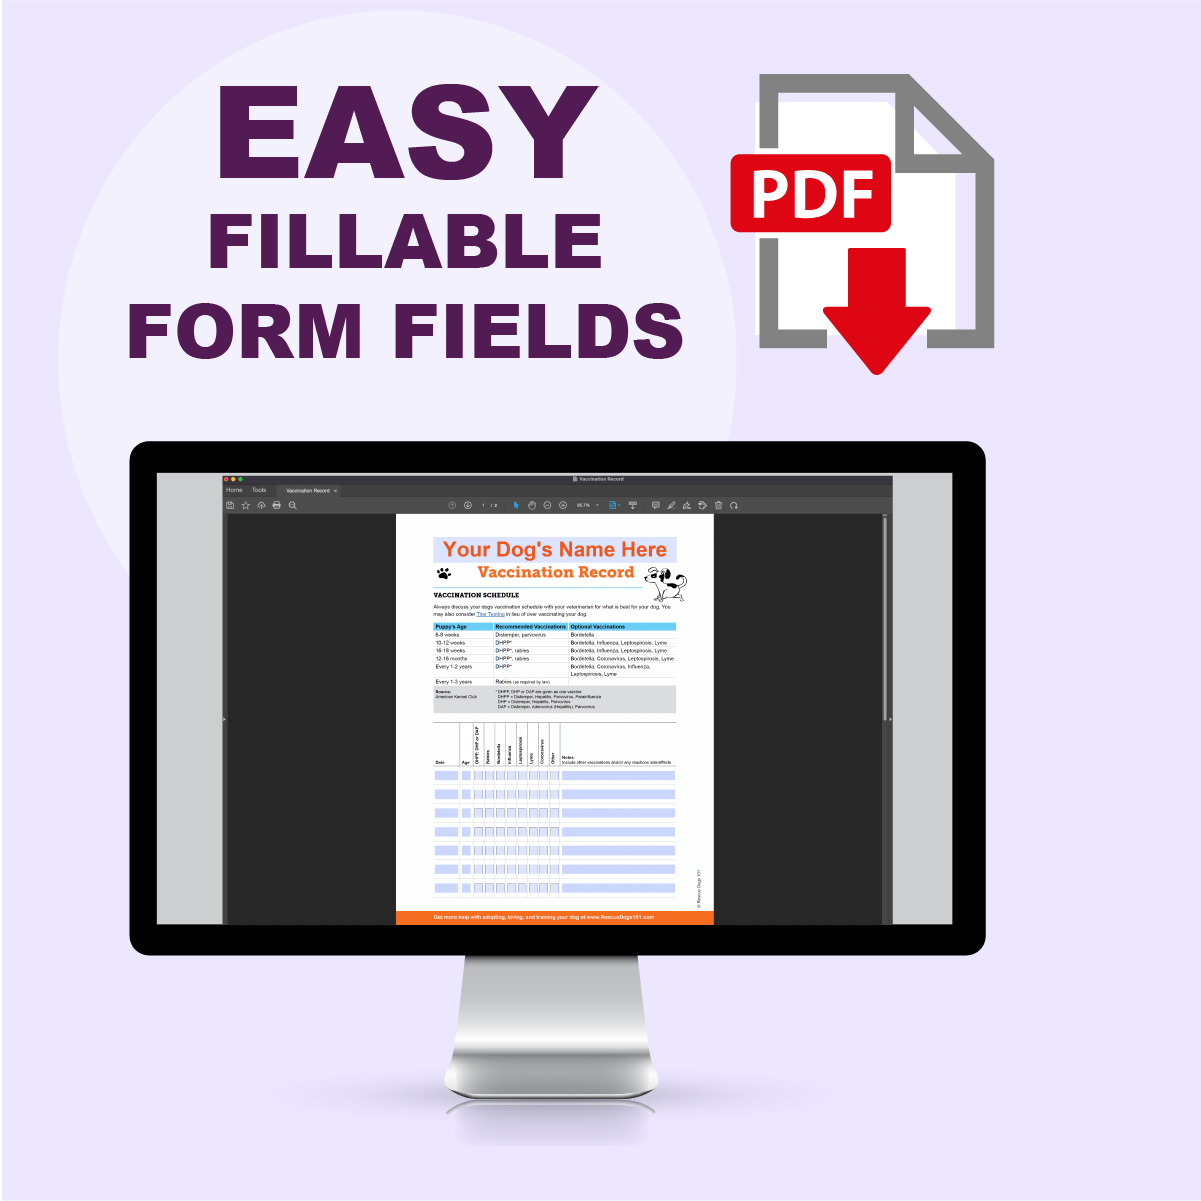 Puppy Vaccination Schedule & Record PDF with easy fillable form fields